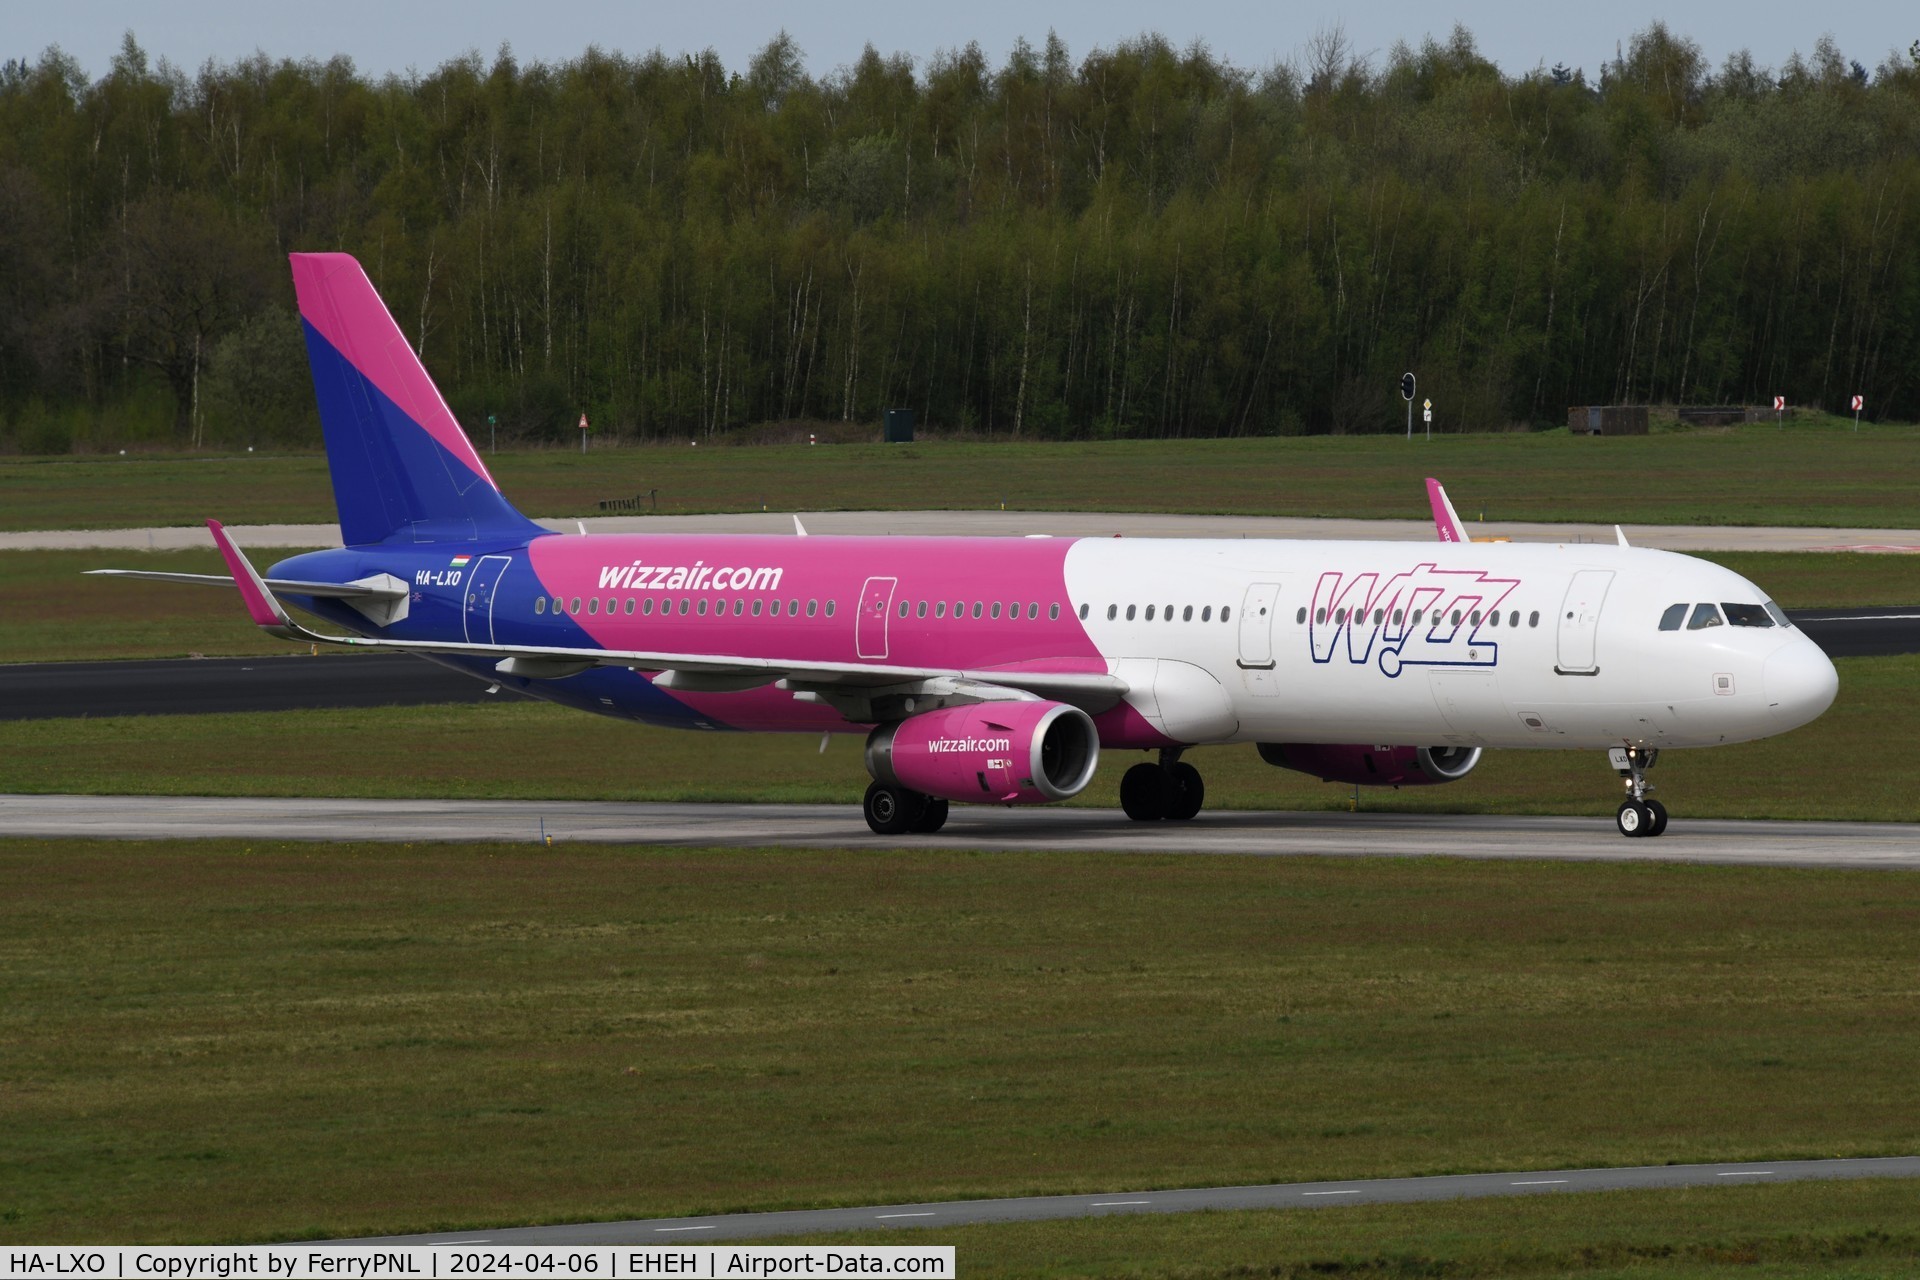 HA-LXO, 2017 Airbus A321-231 C/N 7562, Wizz Air A321 taxying to its parking spot